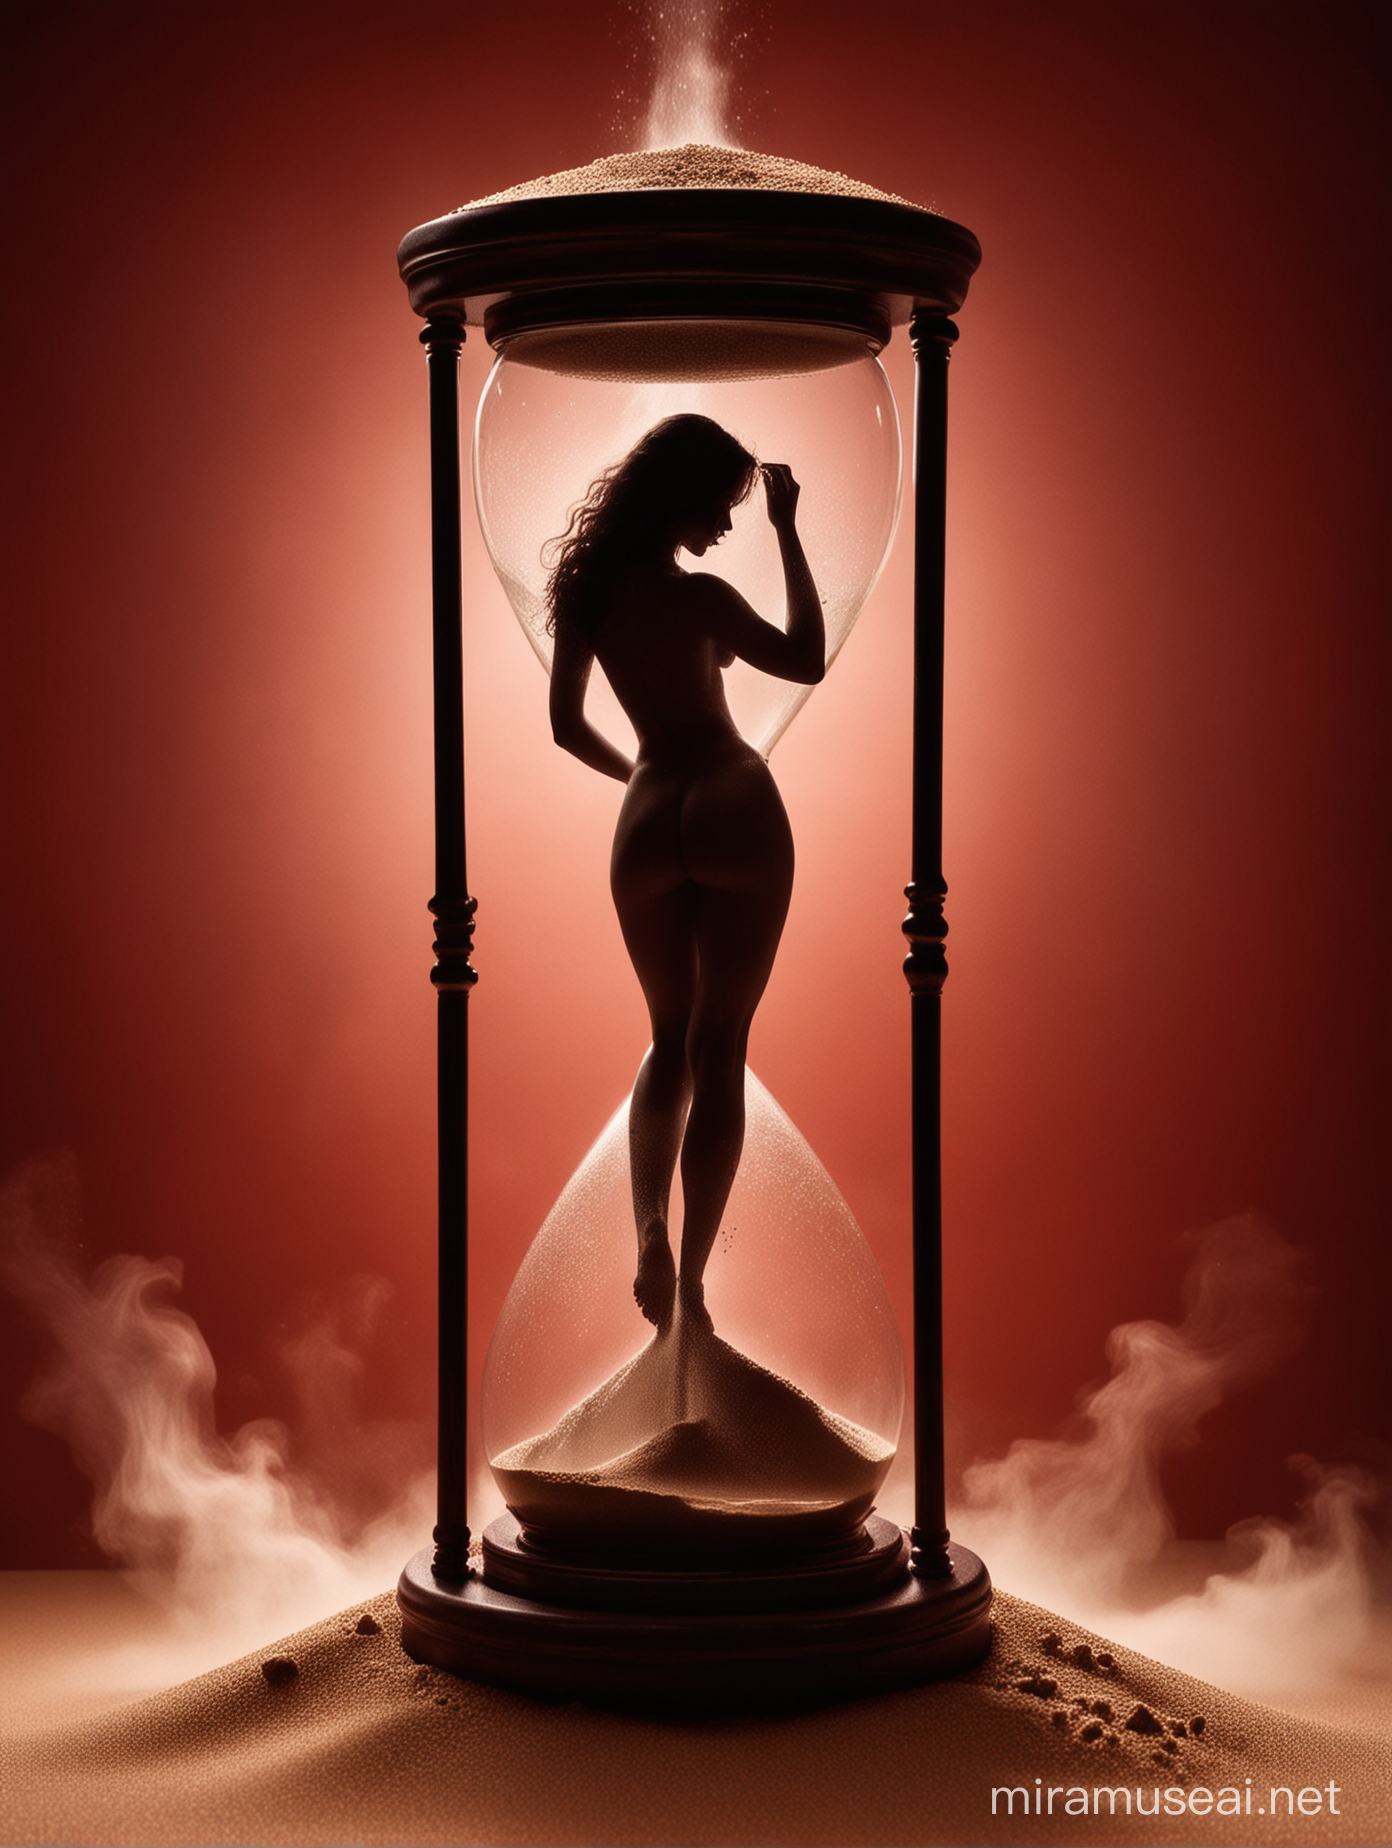 Hourglass.
Sand falls as white steam in shape of black silhouette of nude woman inside hourglass.
Picture is on dark red backround.